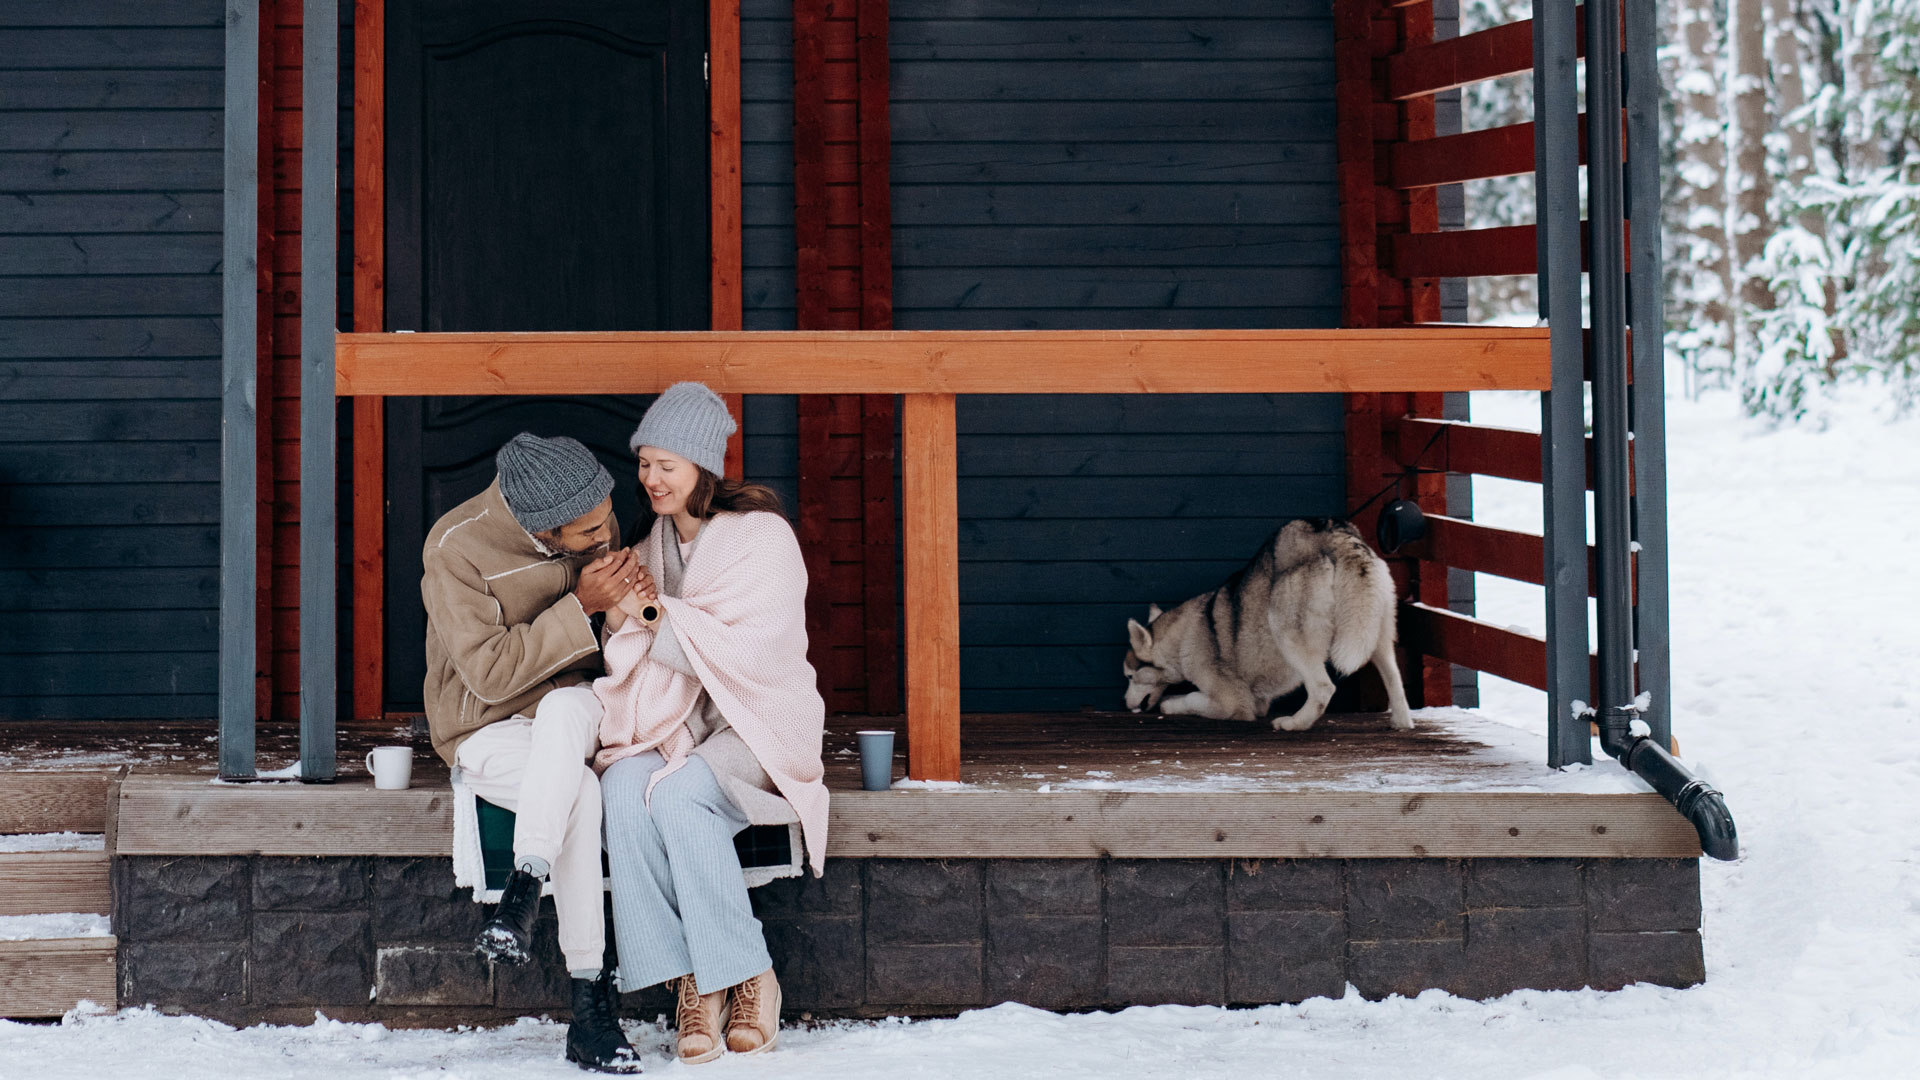 A couple, sitting together on their front porch in the winter, their dog playing behind them.